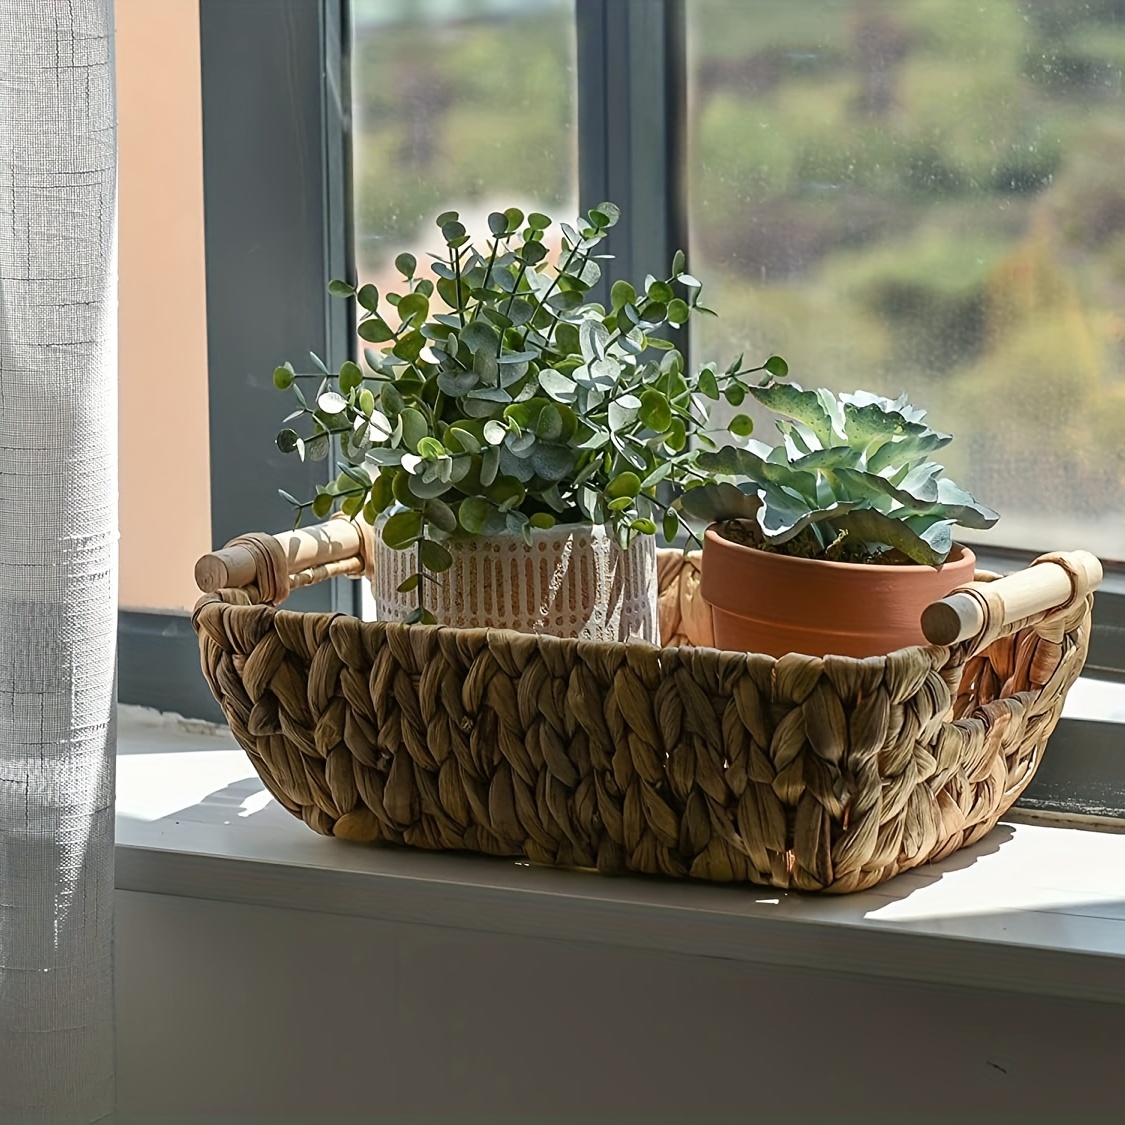 1pcs Decorative Water Hyacinth Wicker Storage Basket with Wooden Handles -  Multipurpose Plant and Sundries Organizer for Bathroom, Bedroom, and Living